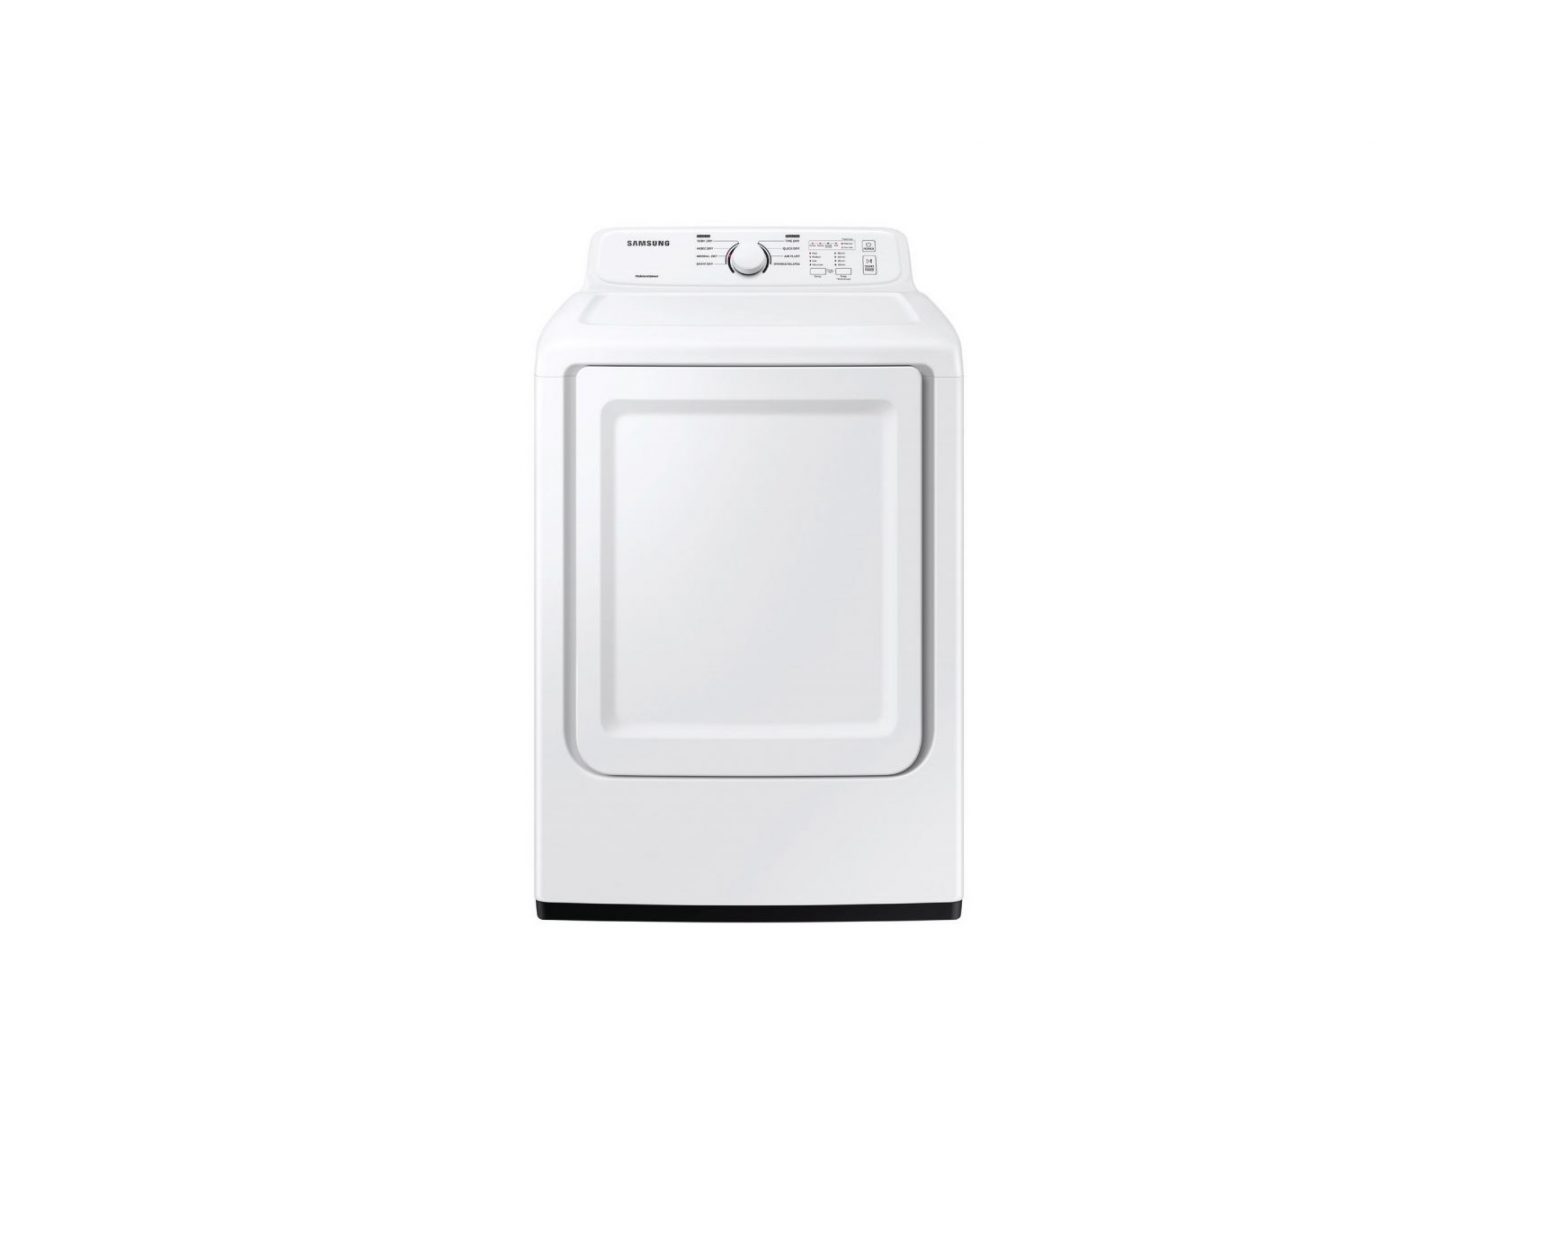 SAMSUNG 7.2 cu. ft. Electric Dryer Sensor Dry 8 Drying Cycles User Guide